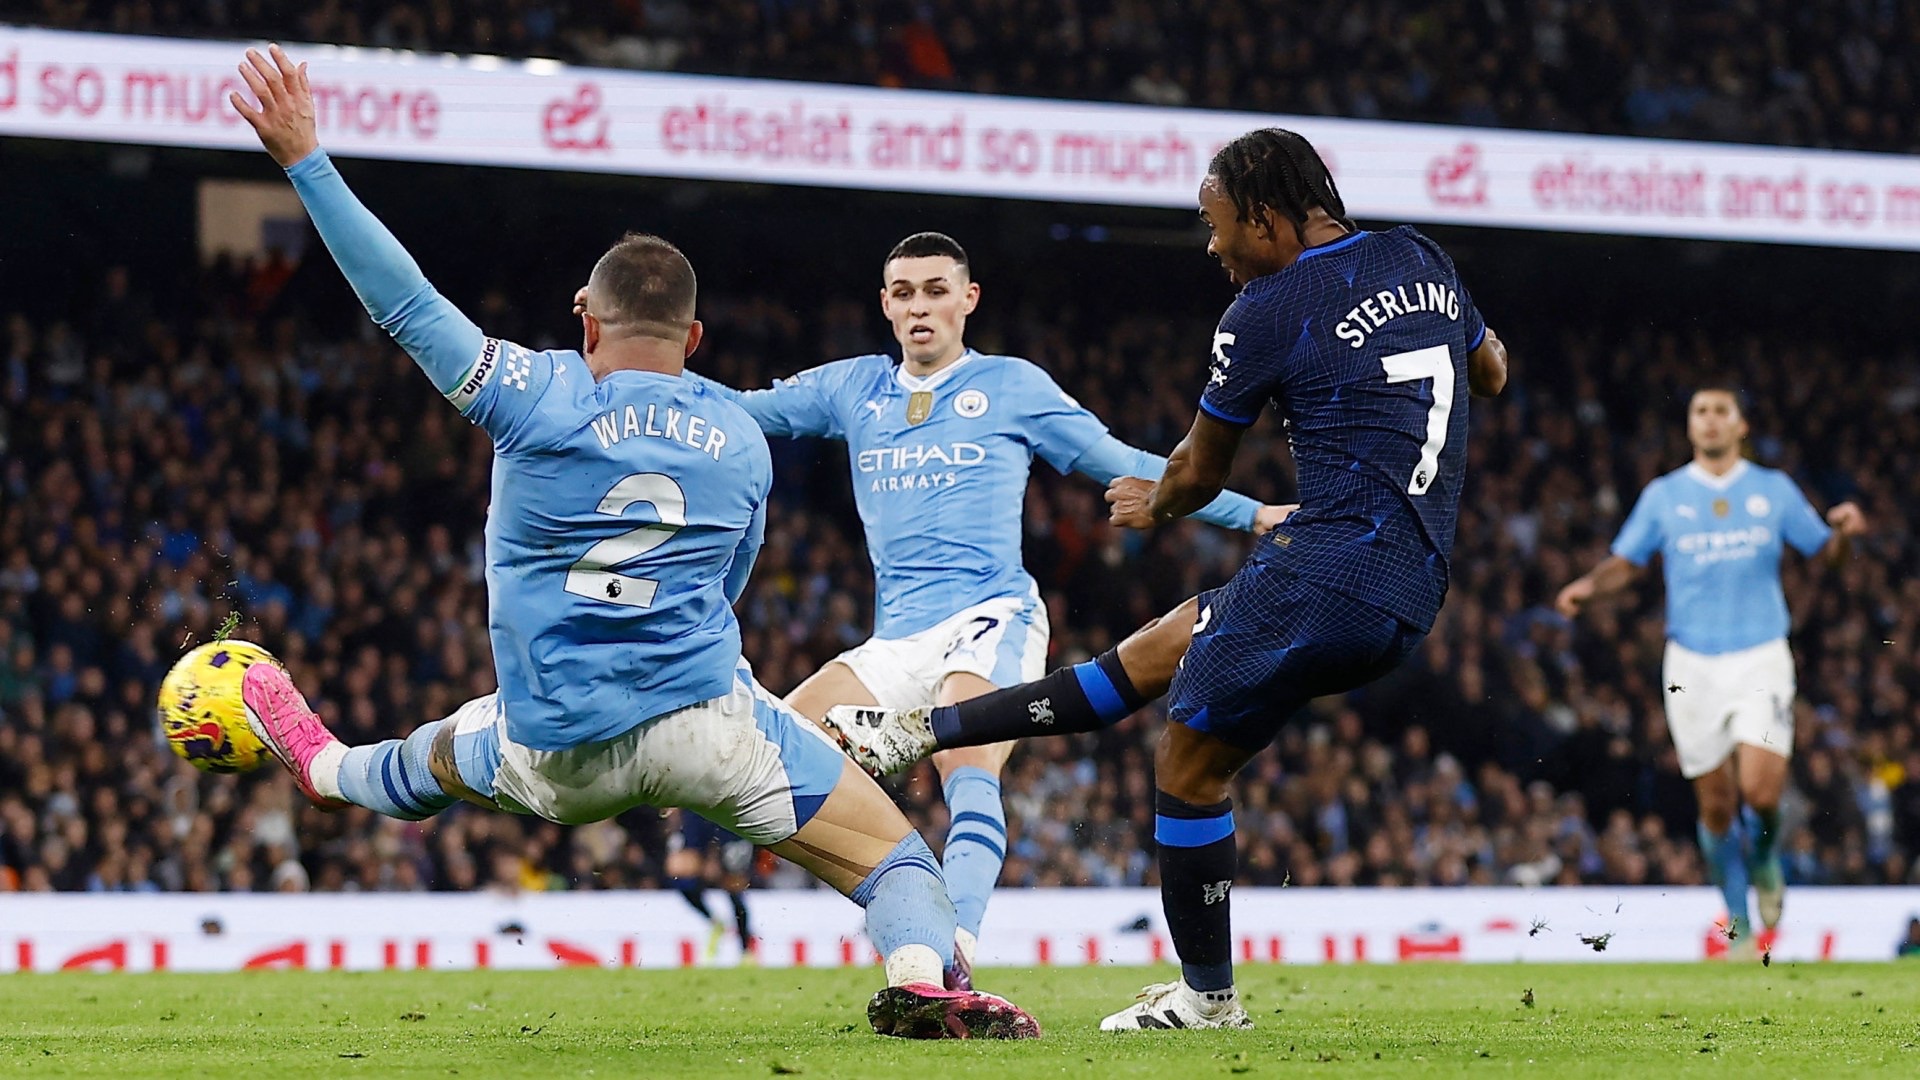 Man City lose ground in title race after draw with Chelsea